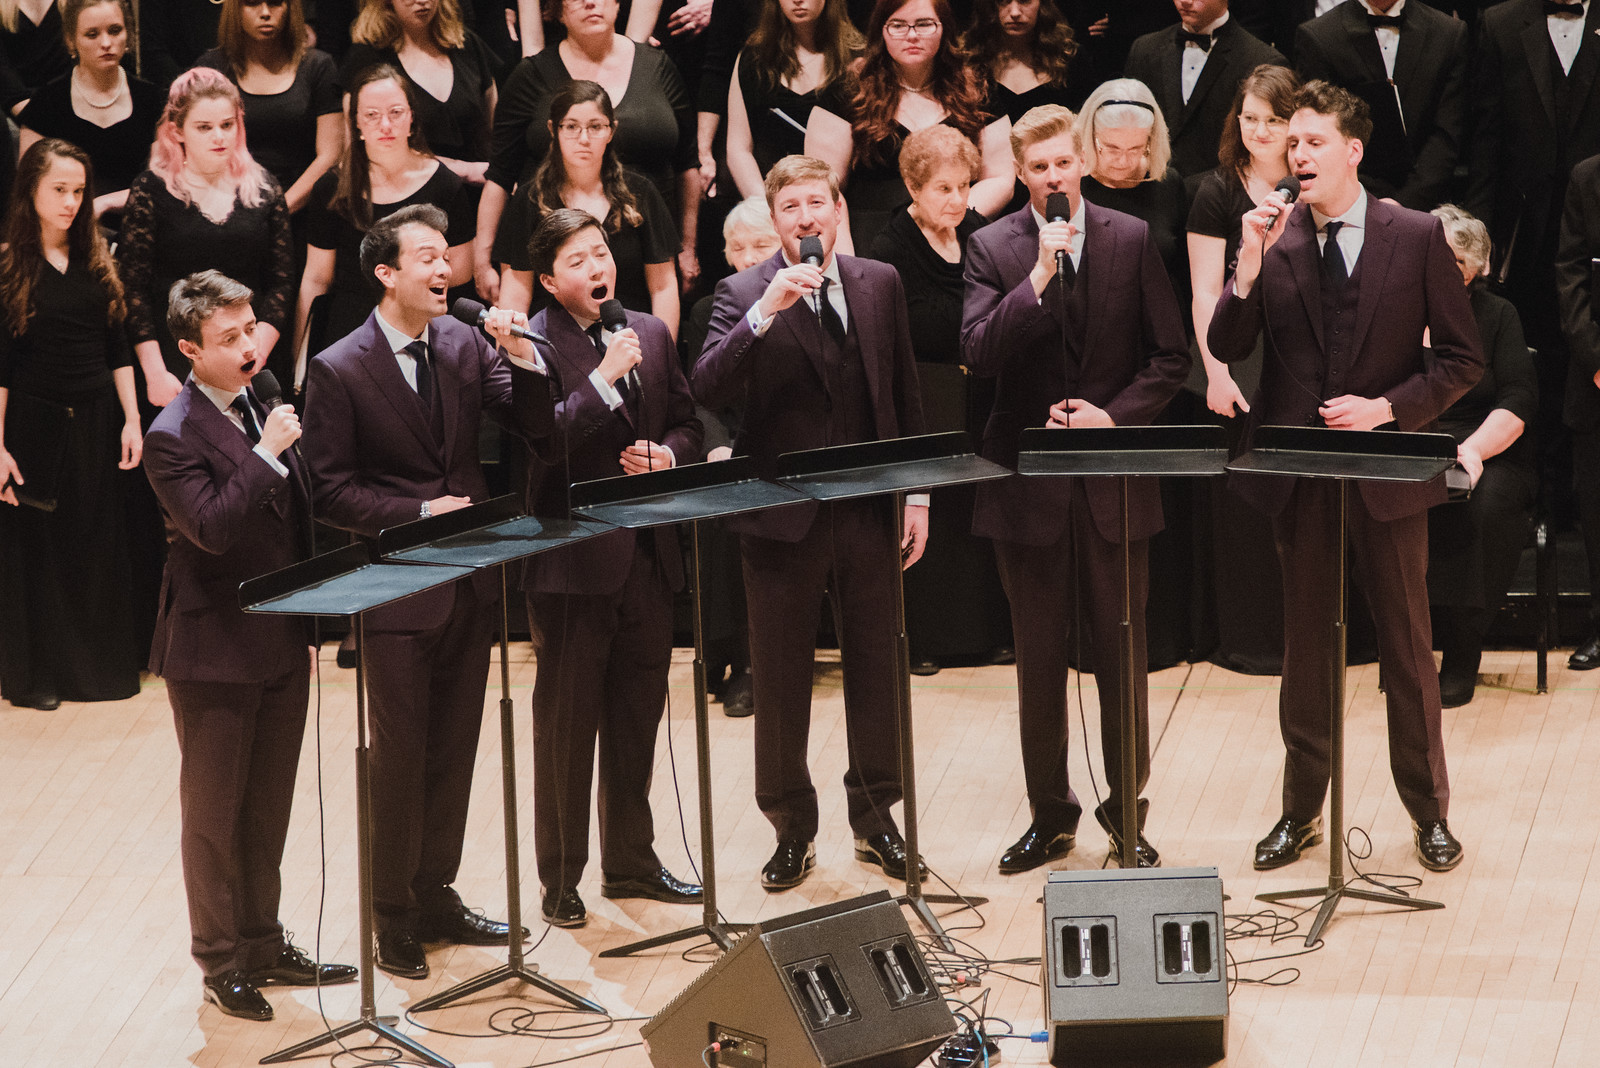 Distinguished Concerts International New York (DCINY) Presents the King’s Singers 50th Anniversary in Review